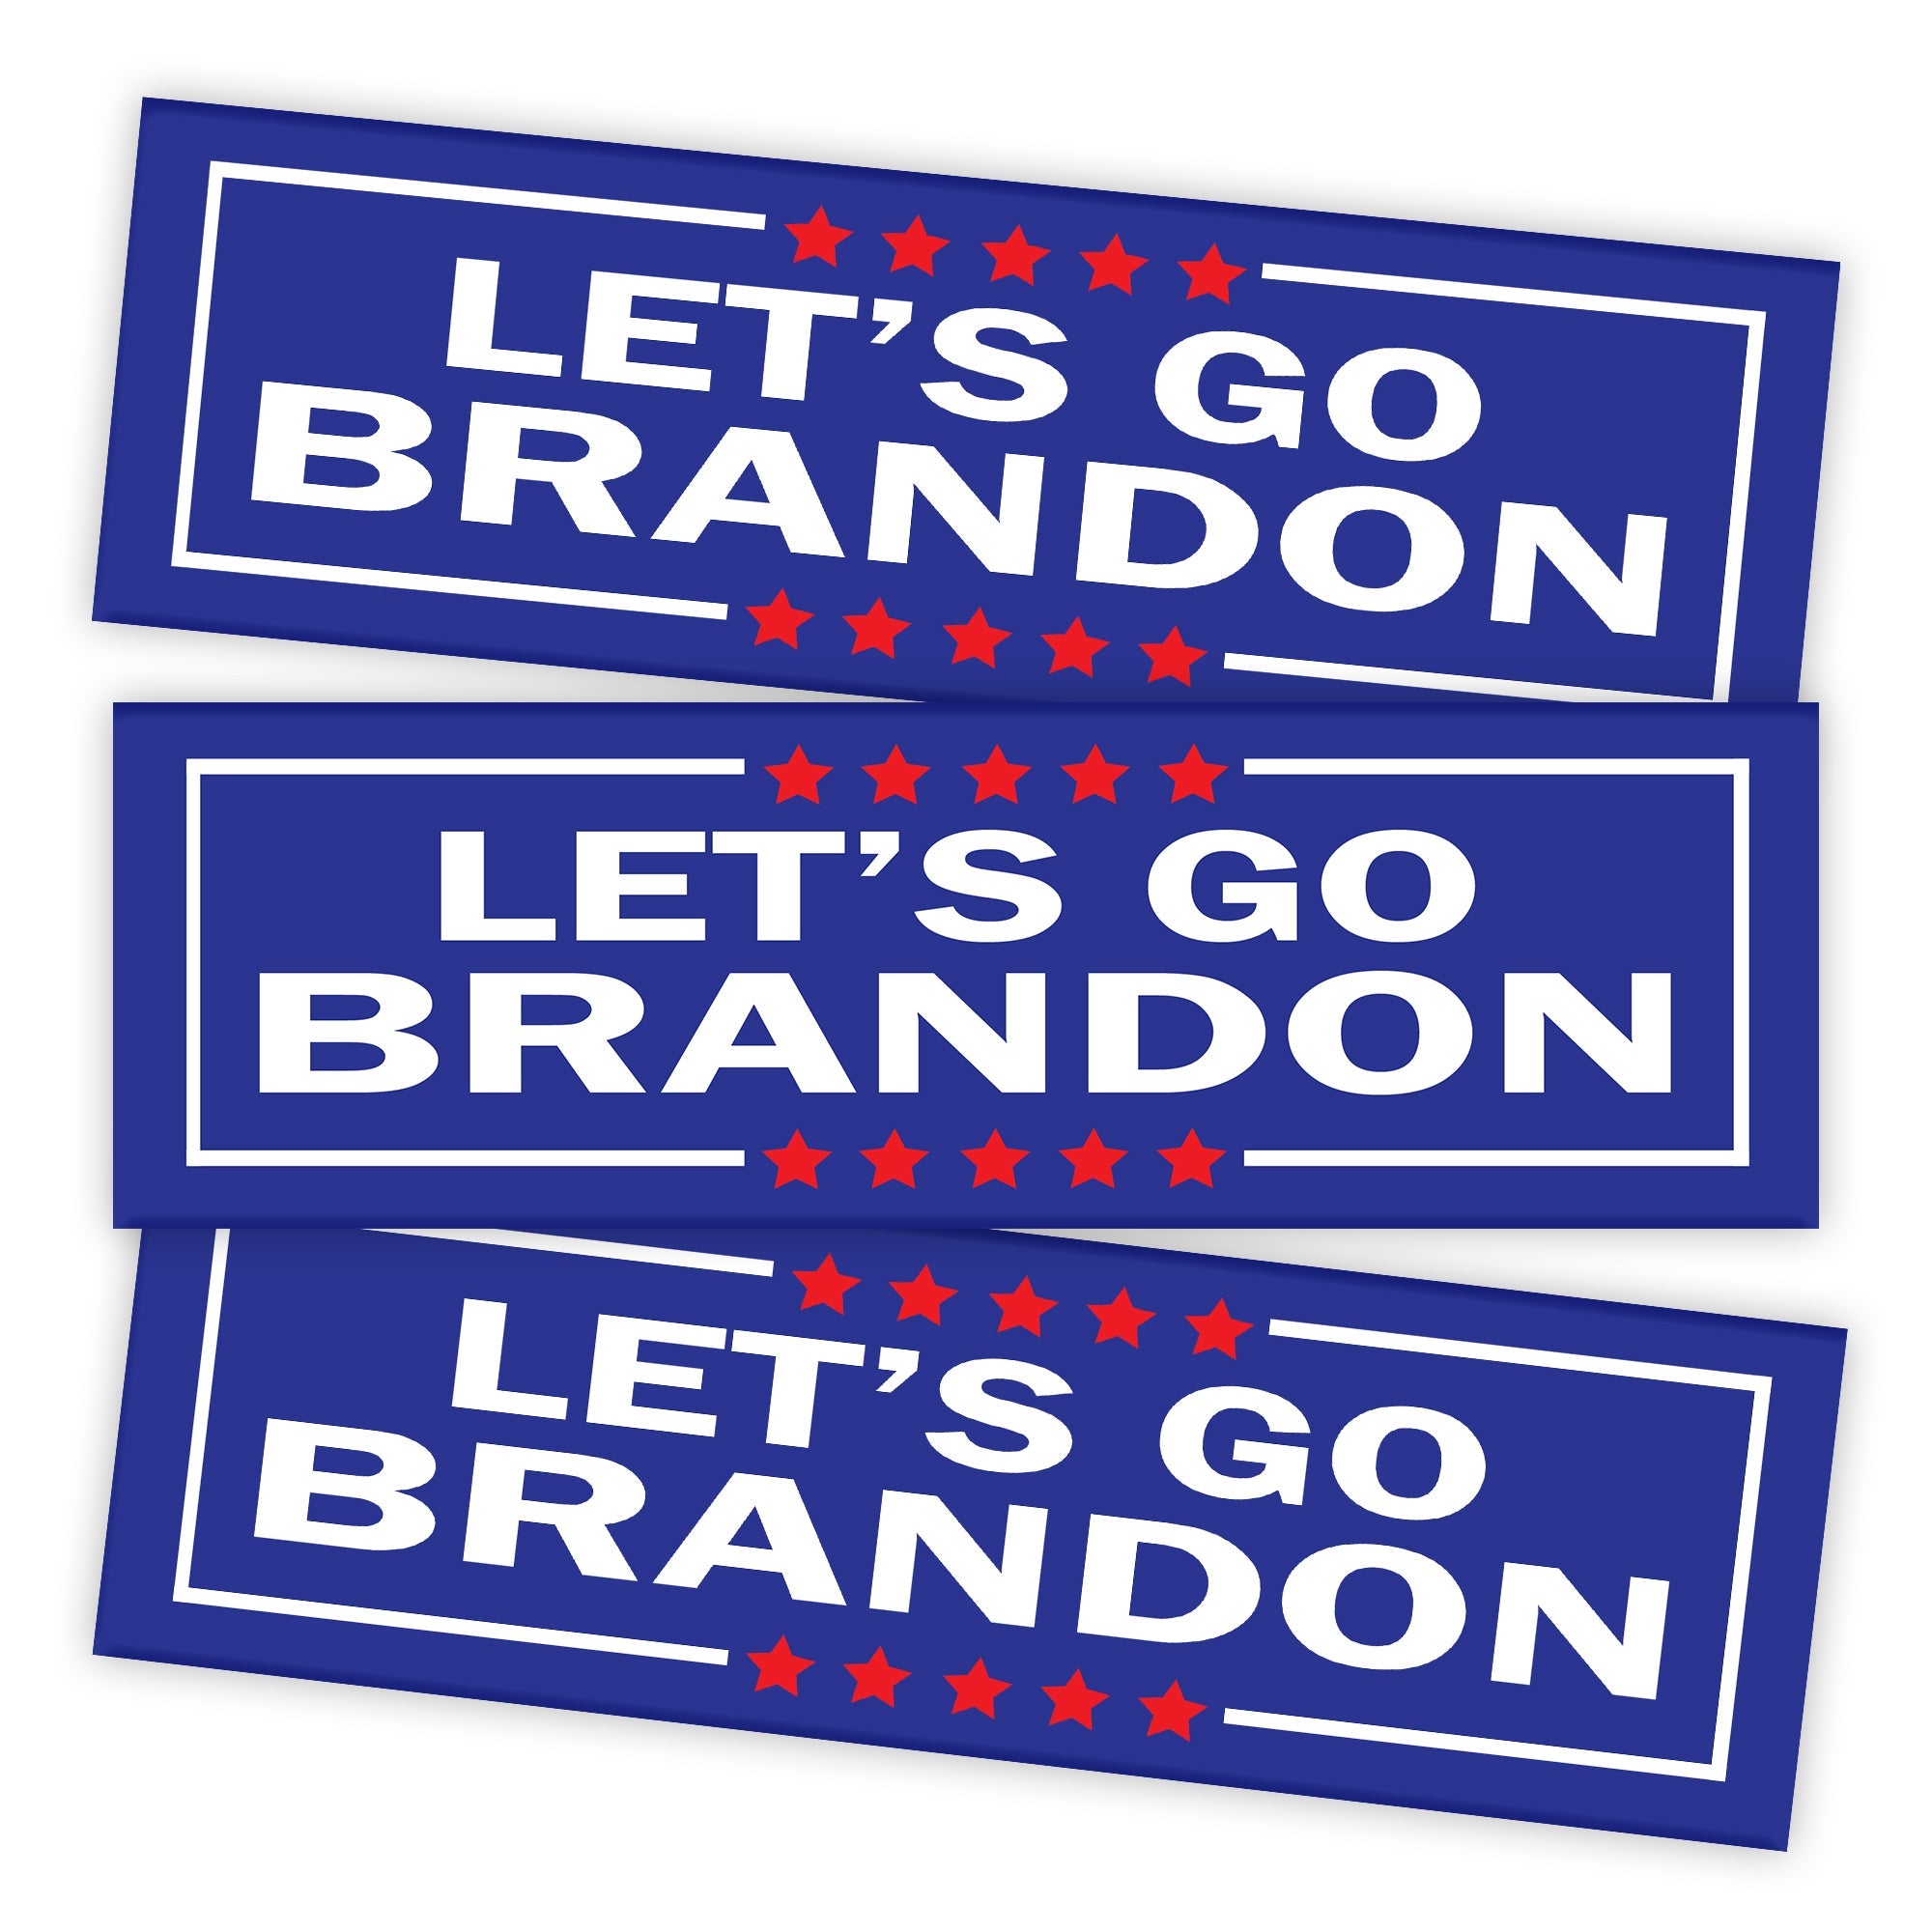 Lets Go Brandon Cursive Decal, Conservative Decal, Made in USA